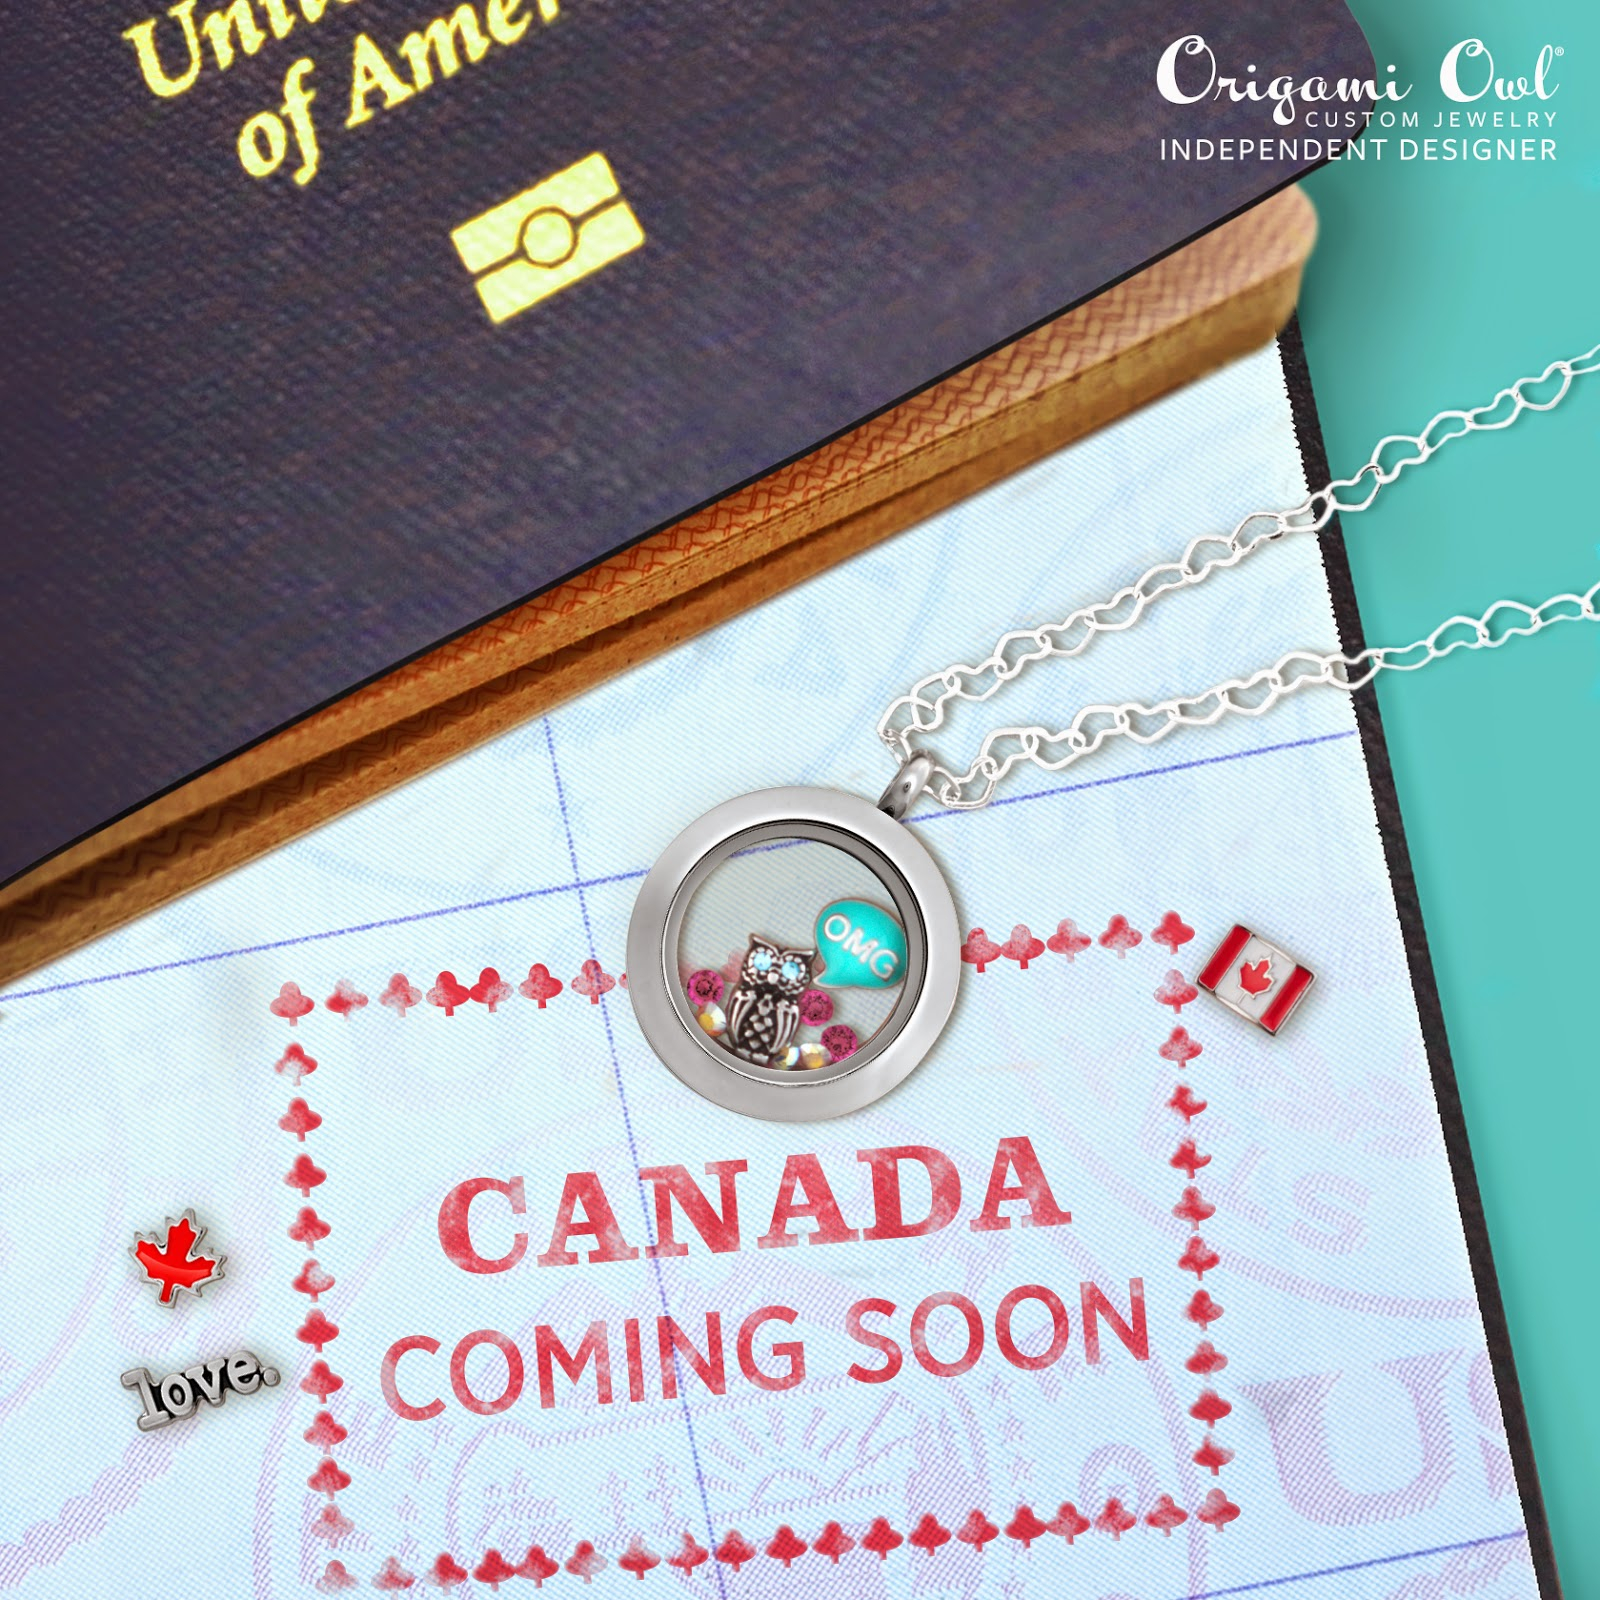 Origami Owl Spring 2015 Sheilas Stamping Stuff Origami Owl Expanding To Canada